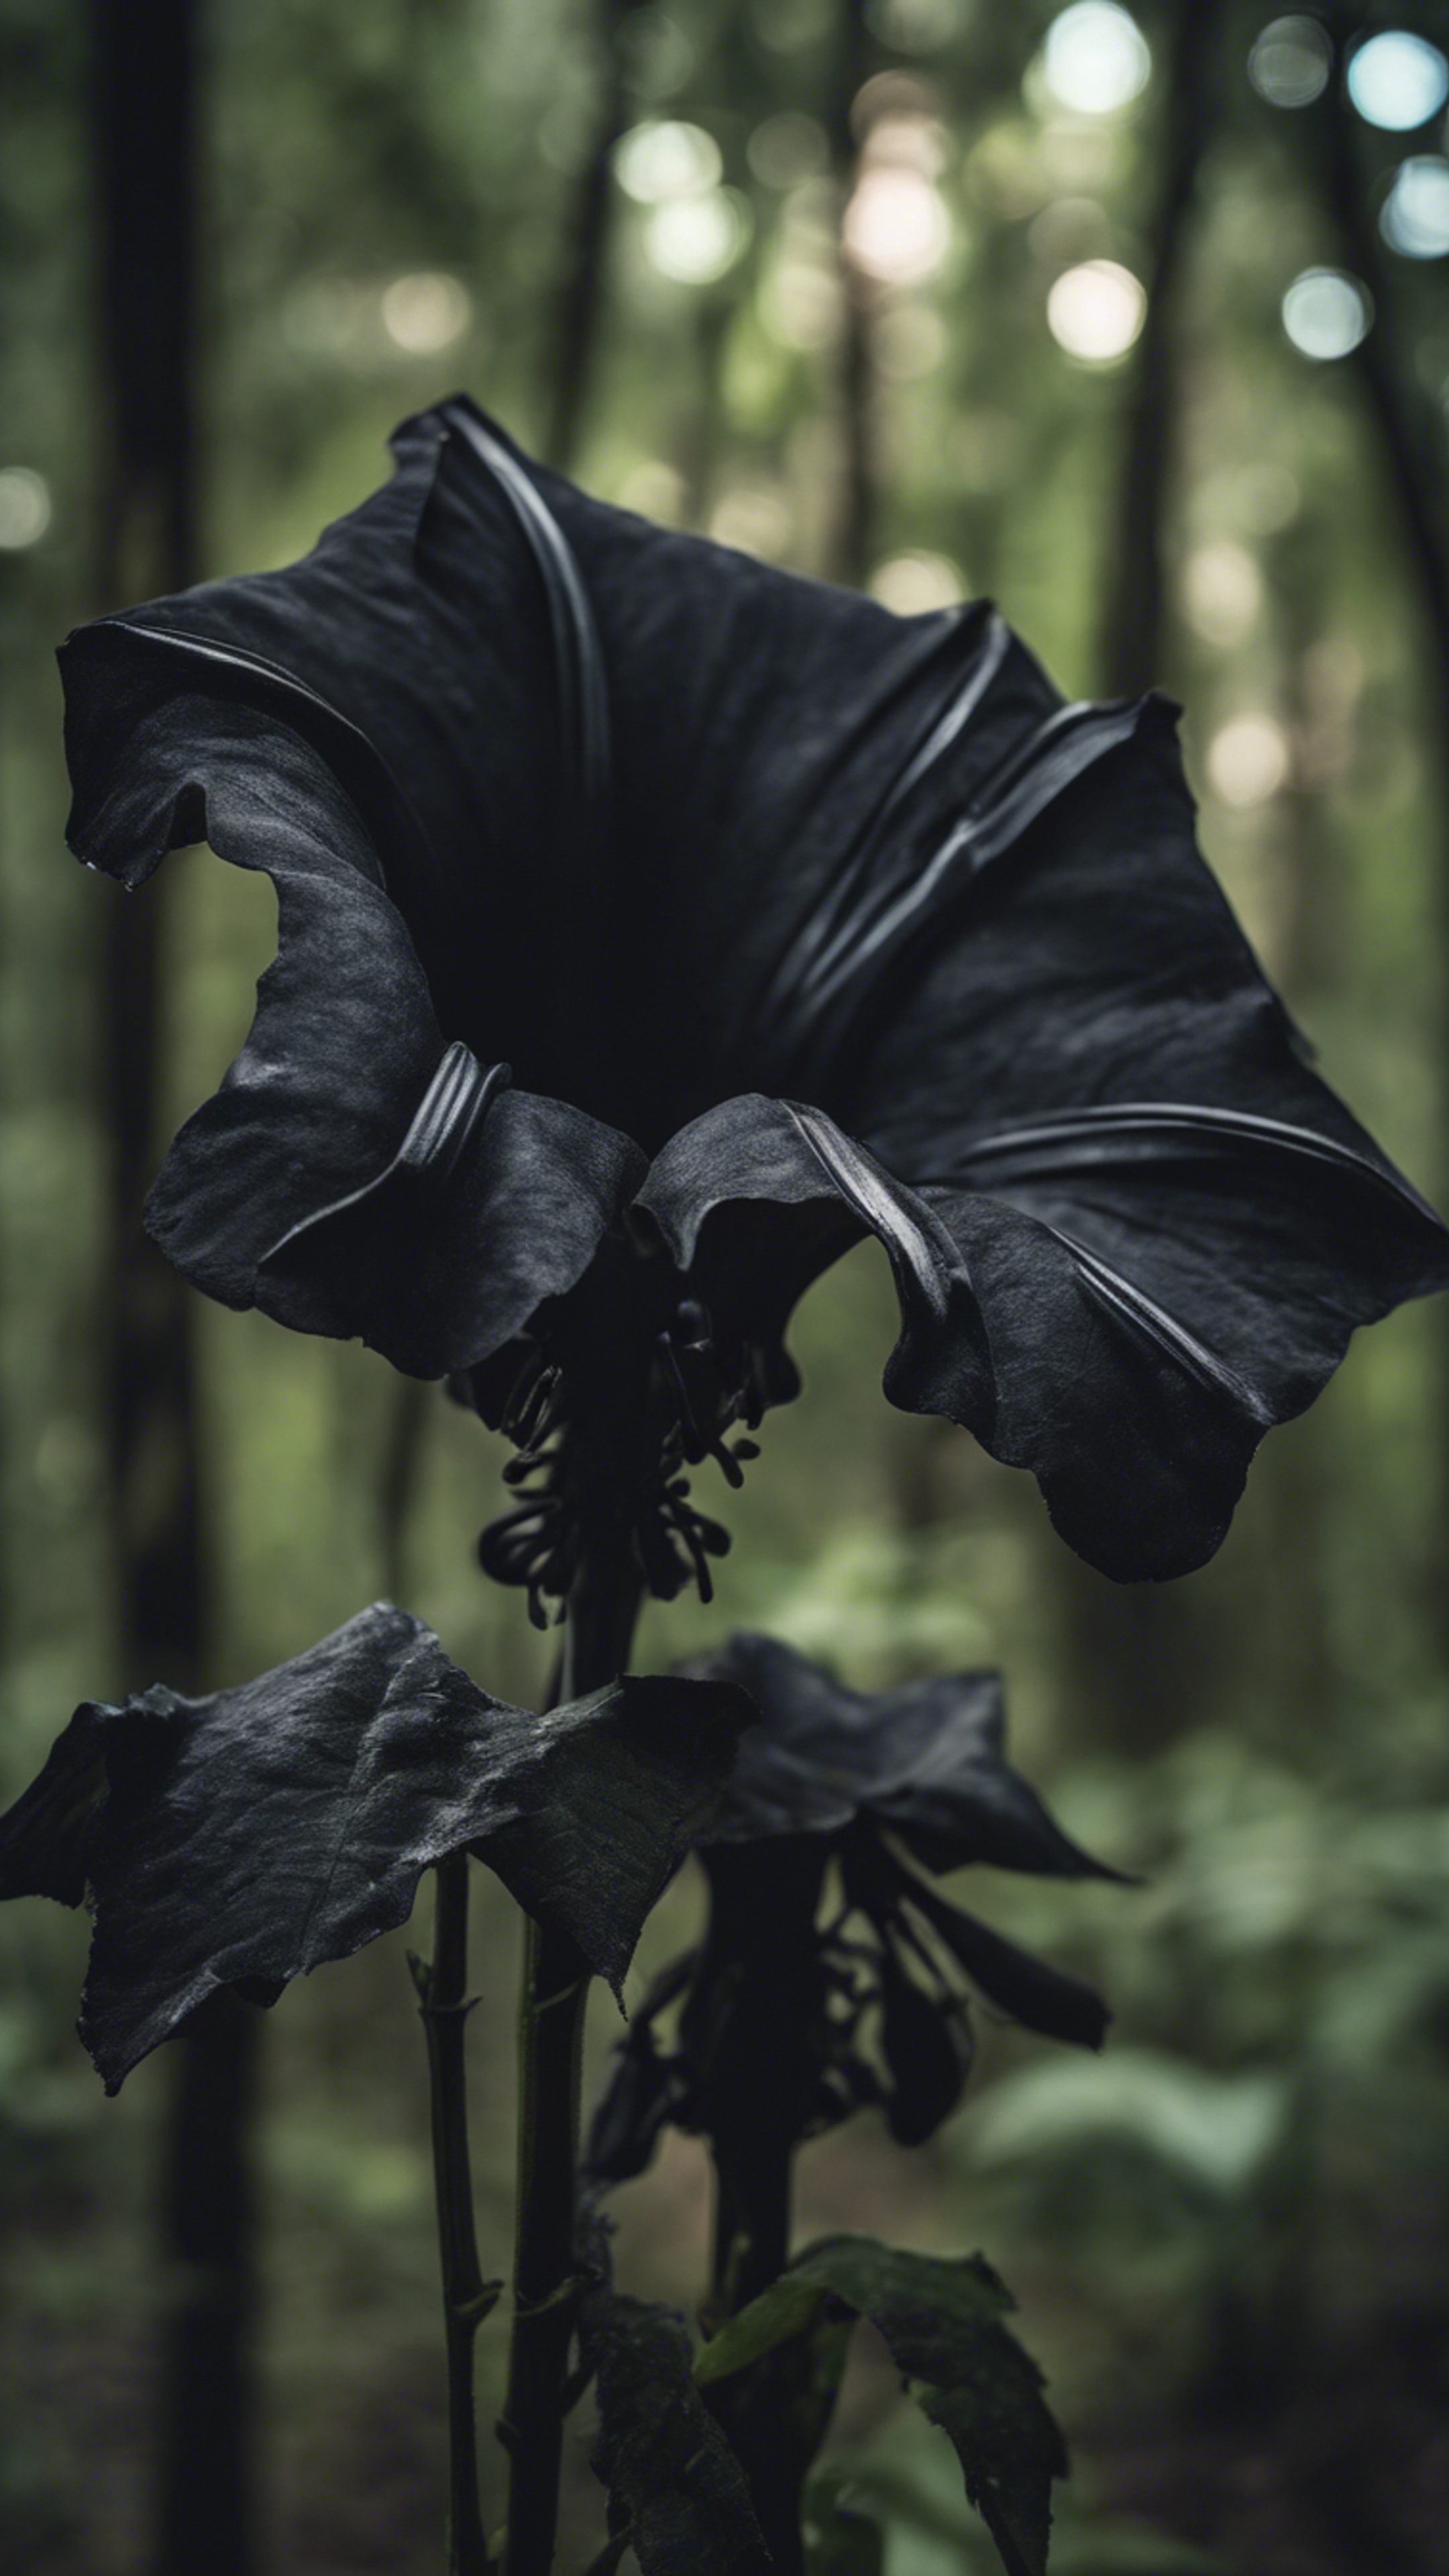 A black trumpet flower evoking an eerie yet captivating atmosphere in the heart of a dense forest. Tapeta[87d98efd7999478c8568]